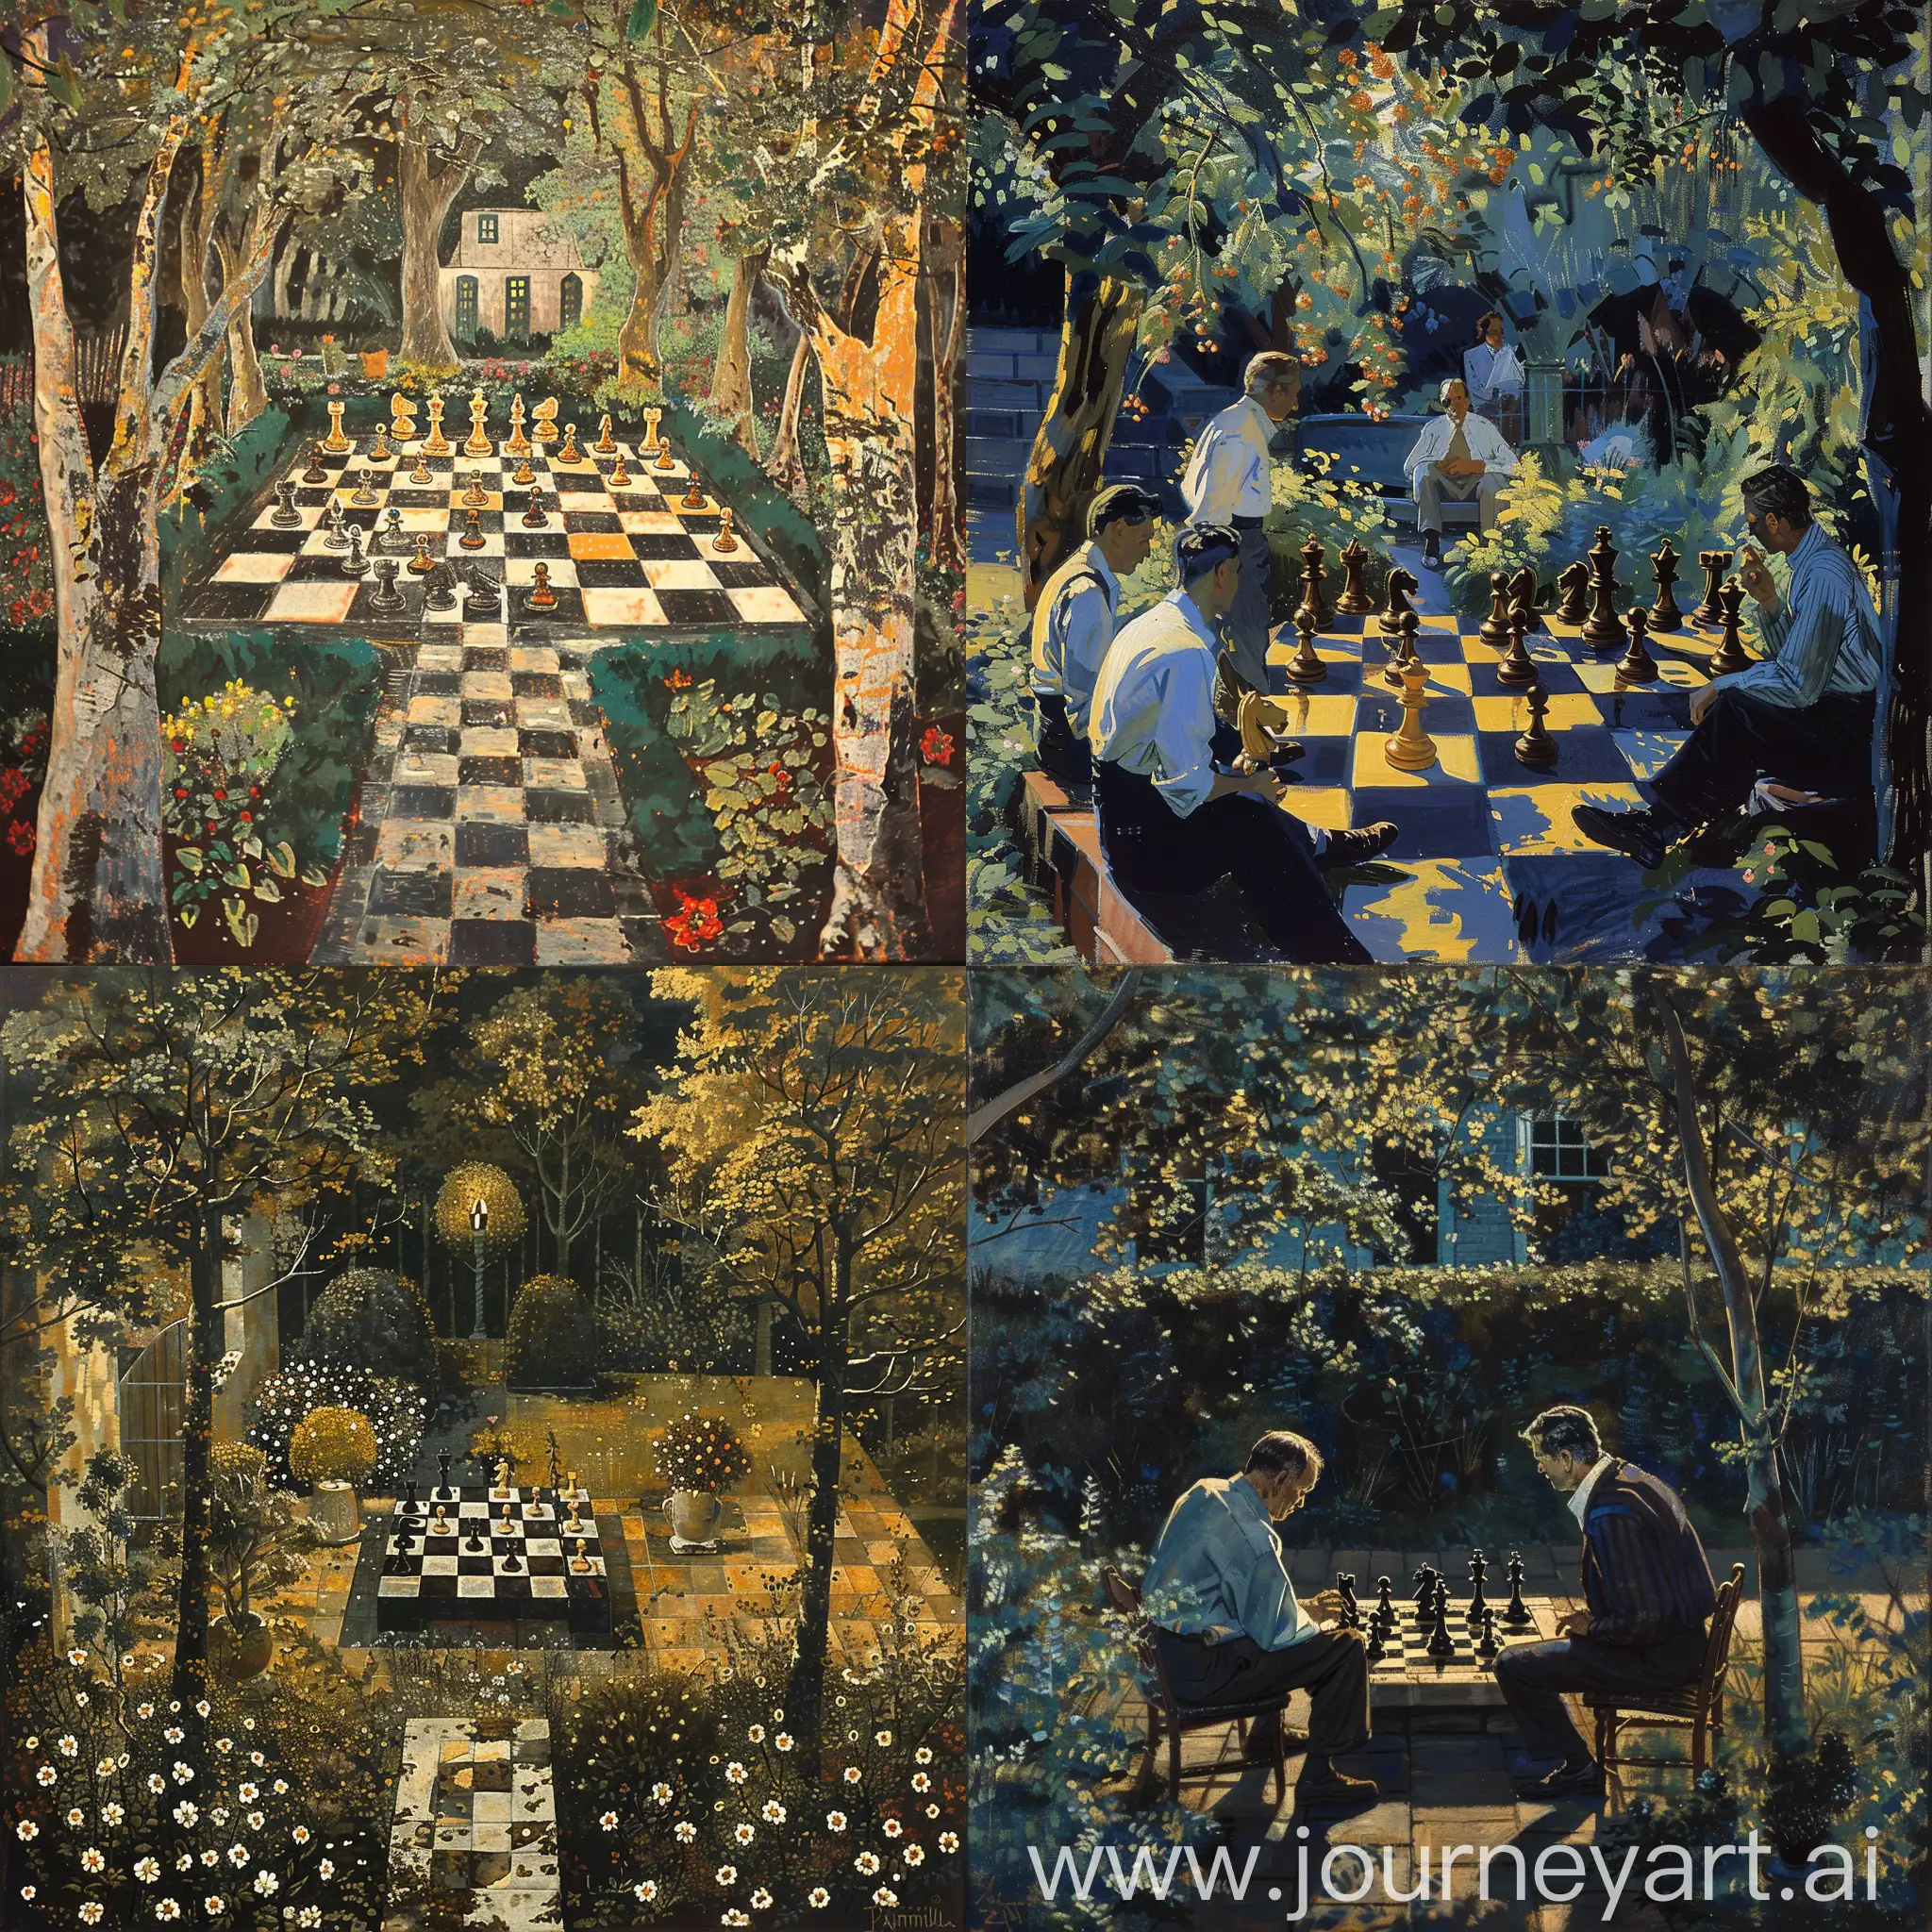 Chess-Game-in-the-Mysterious-Garden-Inspired-by-Tarcila-do-Amaral